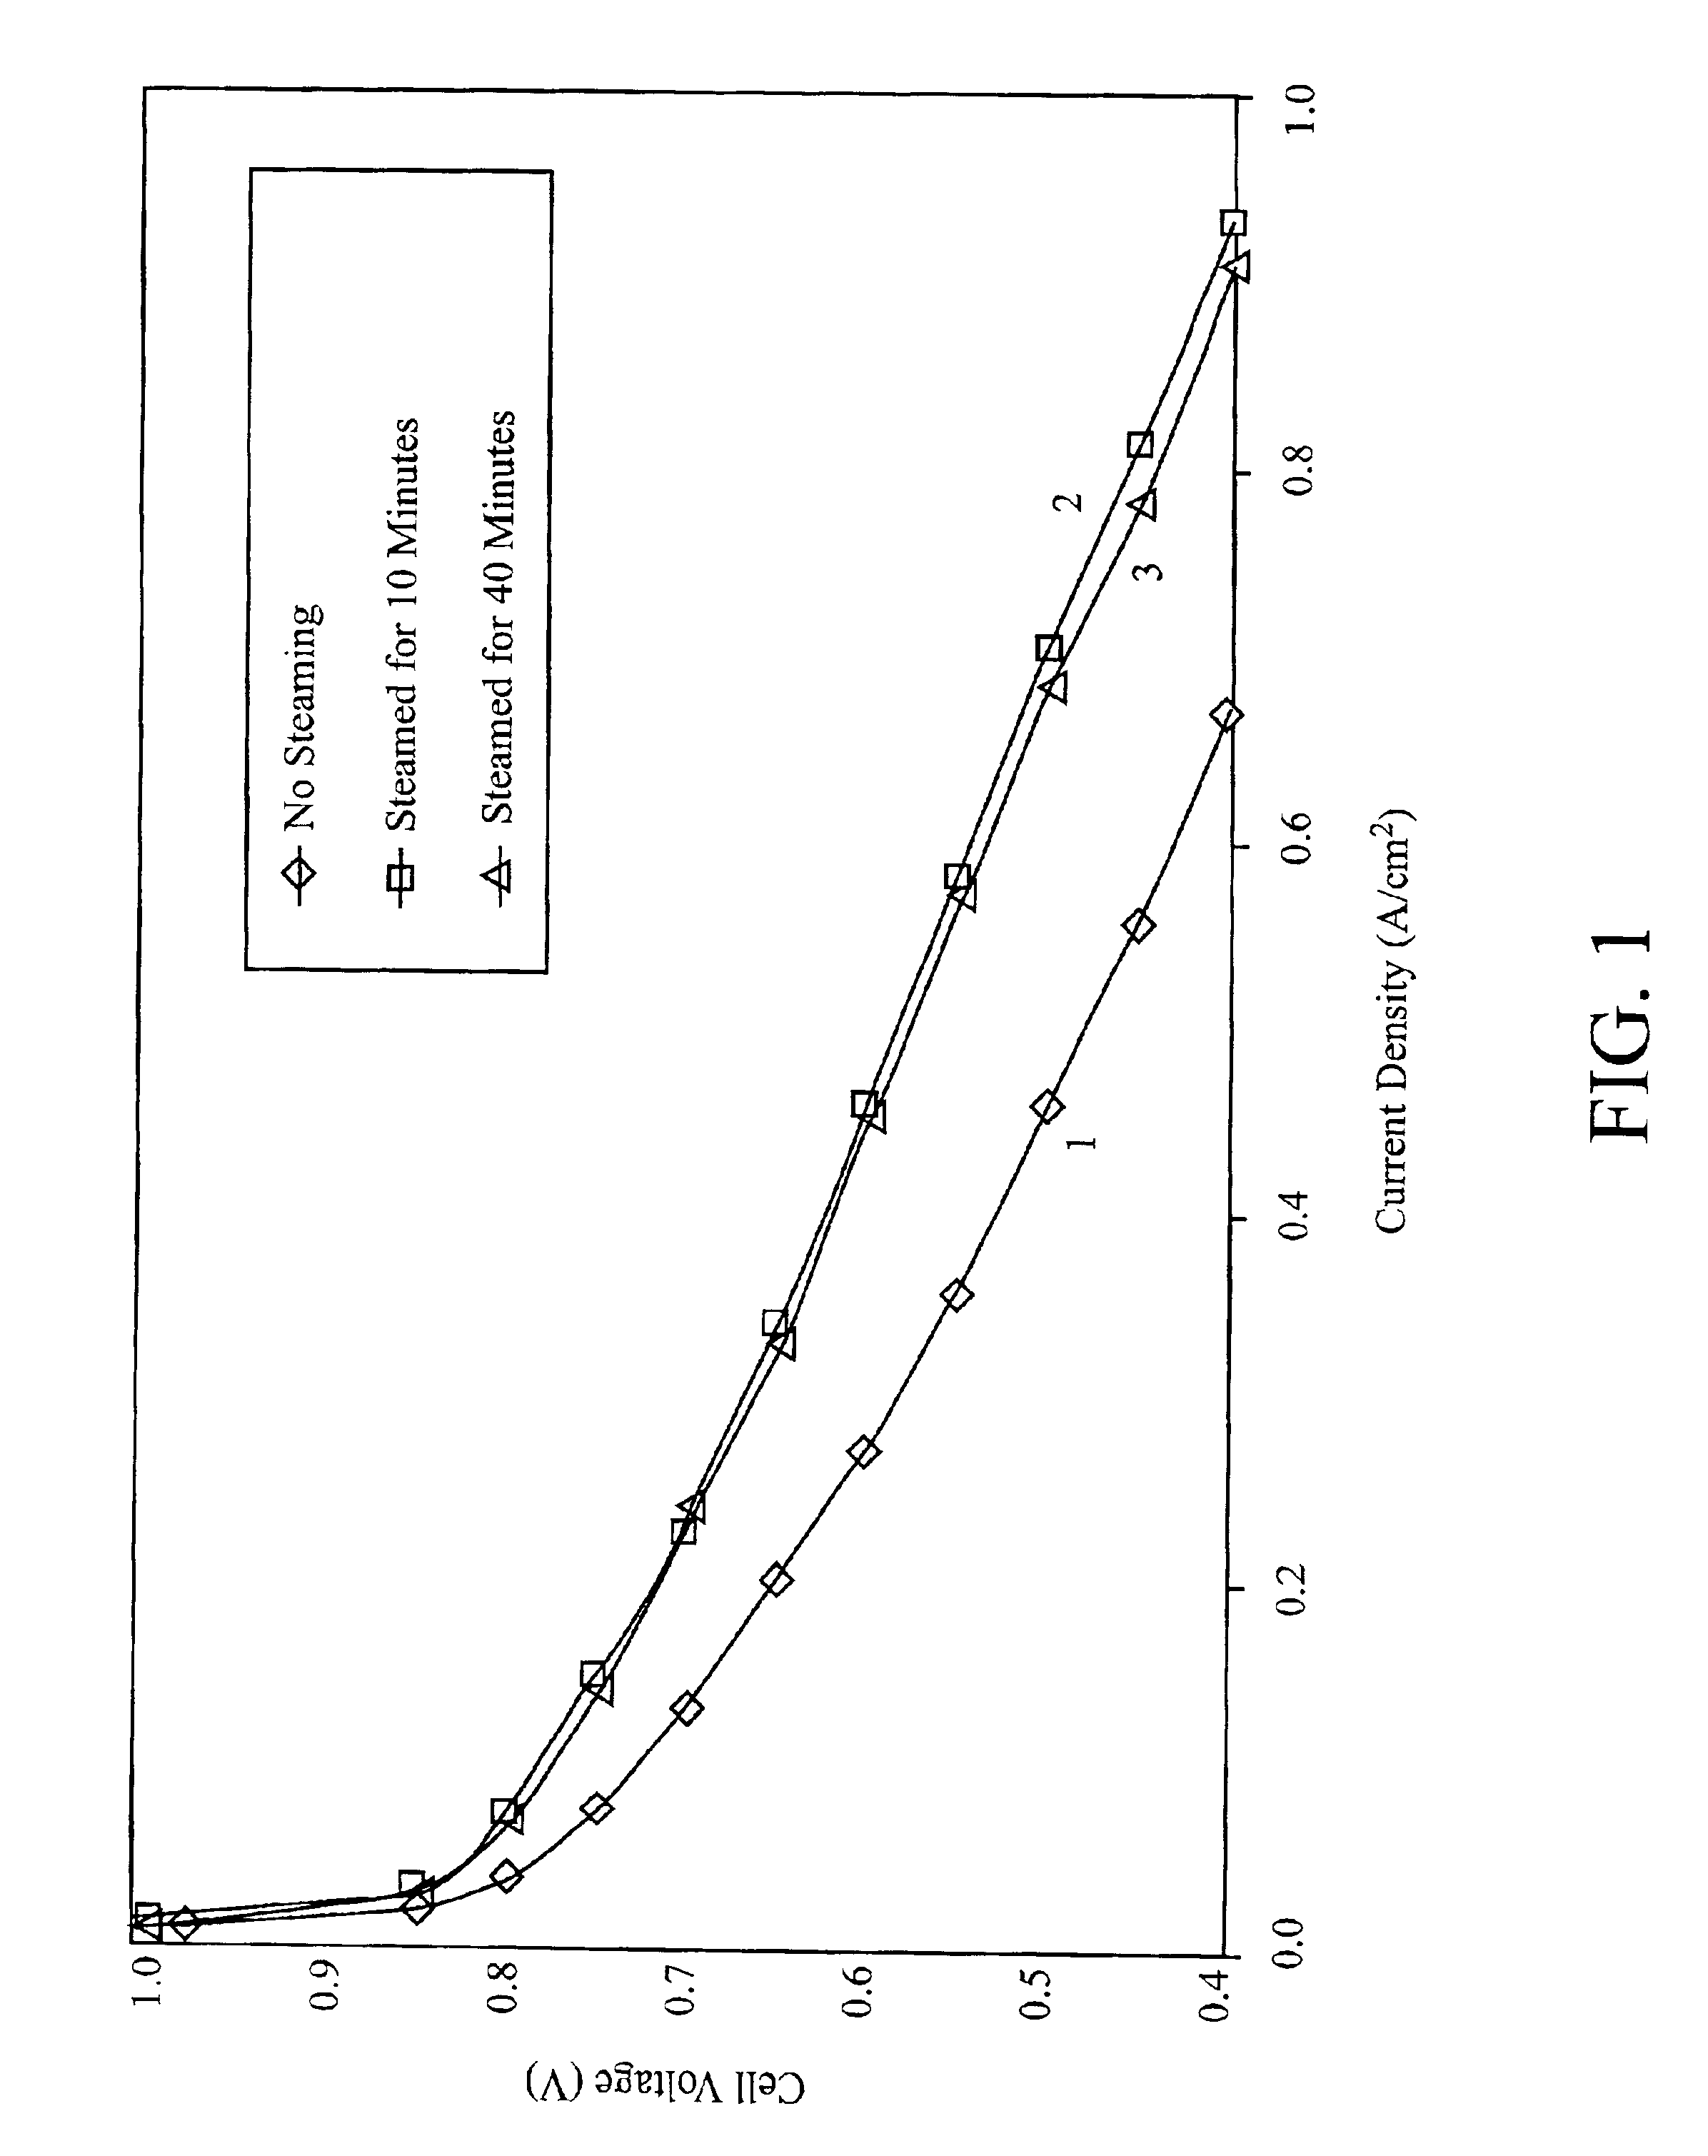 Enhancement of electrochemical cell performance